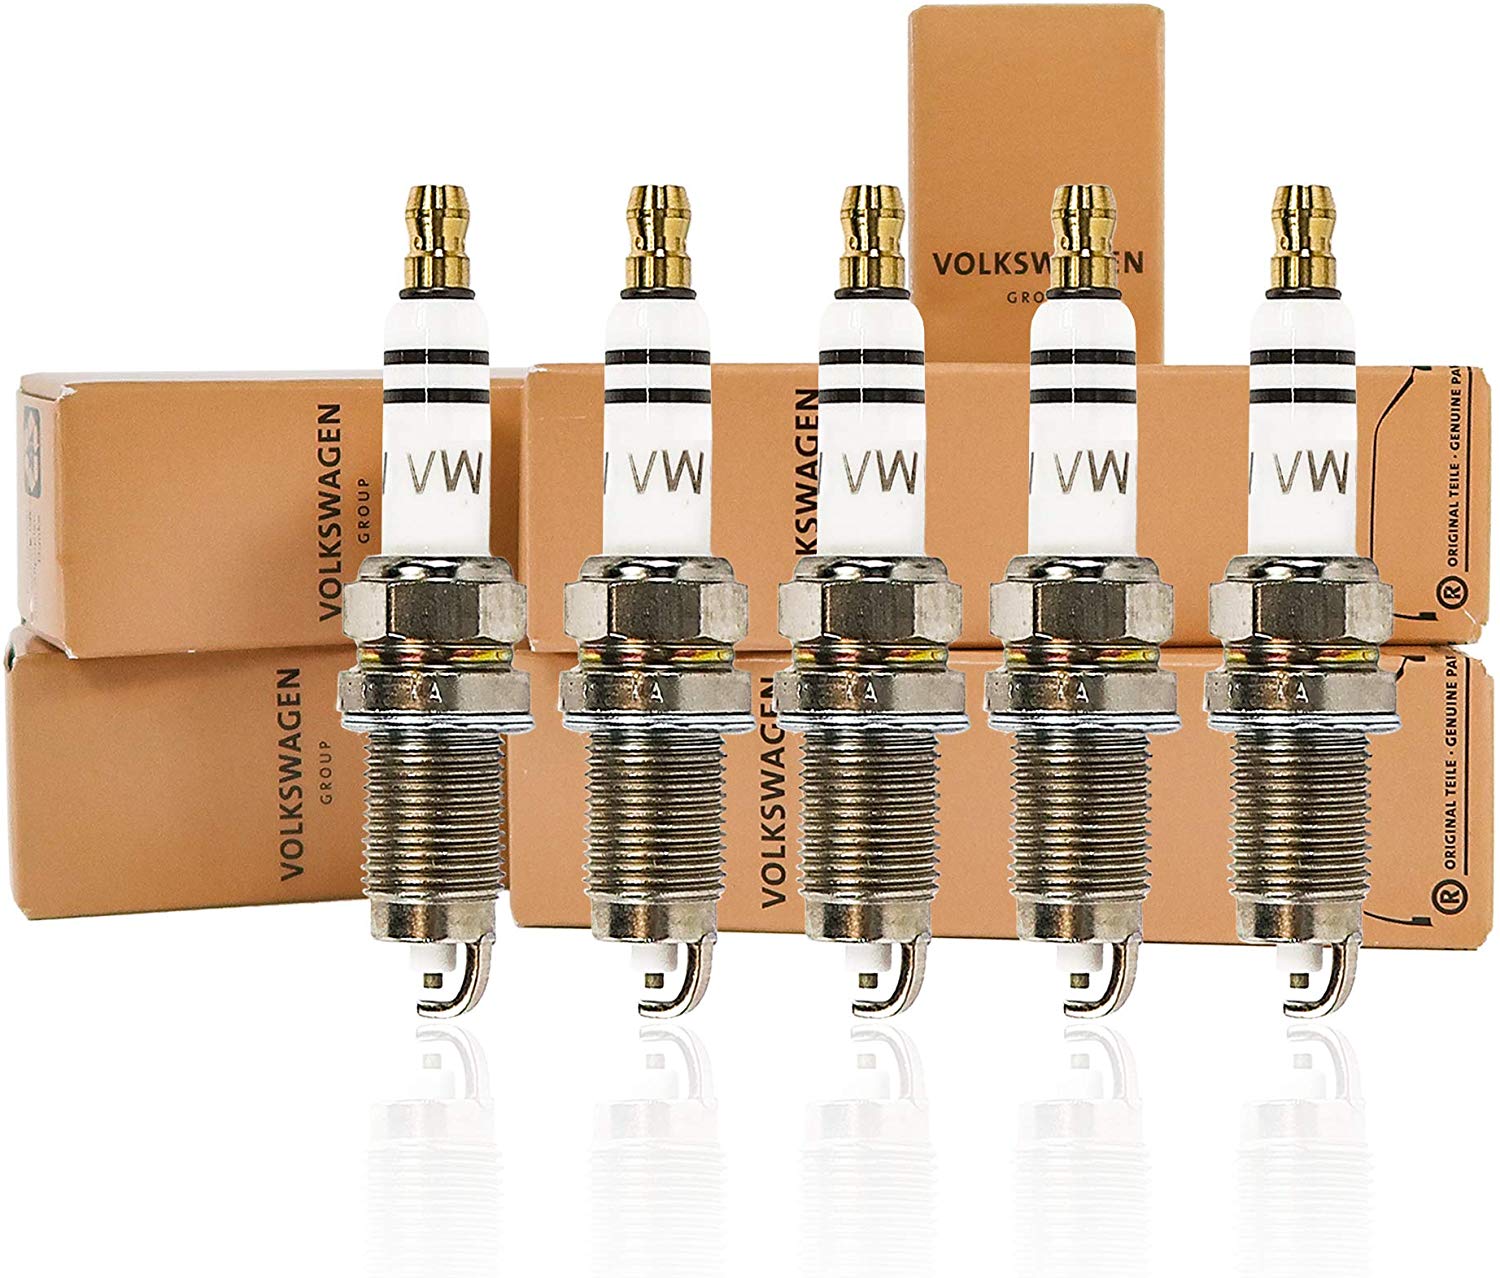 Genuine Spark Plugs, Set of 5 Volkswagen Spark Plugs for 2.5 L Engine, 101 905 601 F, Genuine Set of 5 Vehicle Part Manufactured in Germany fits to Volkswagen Models